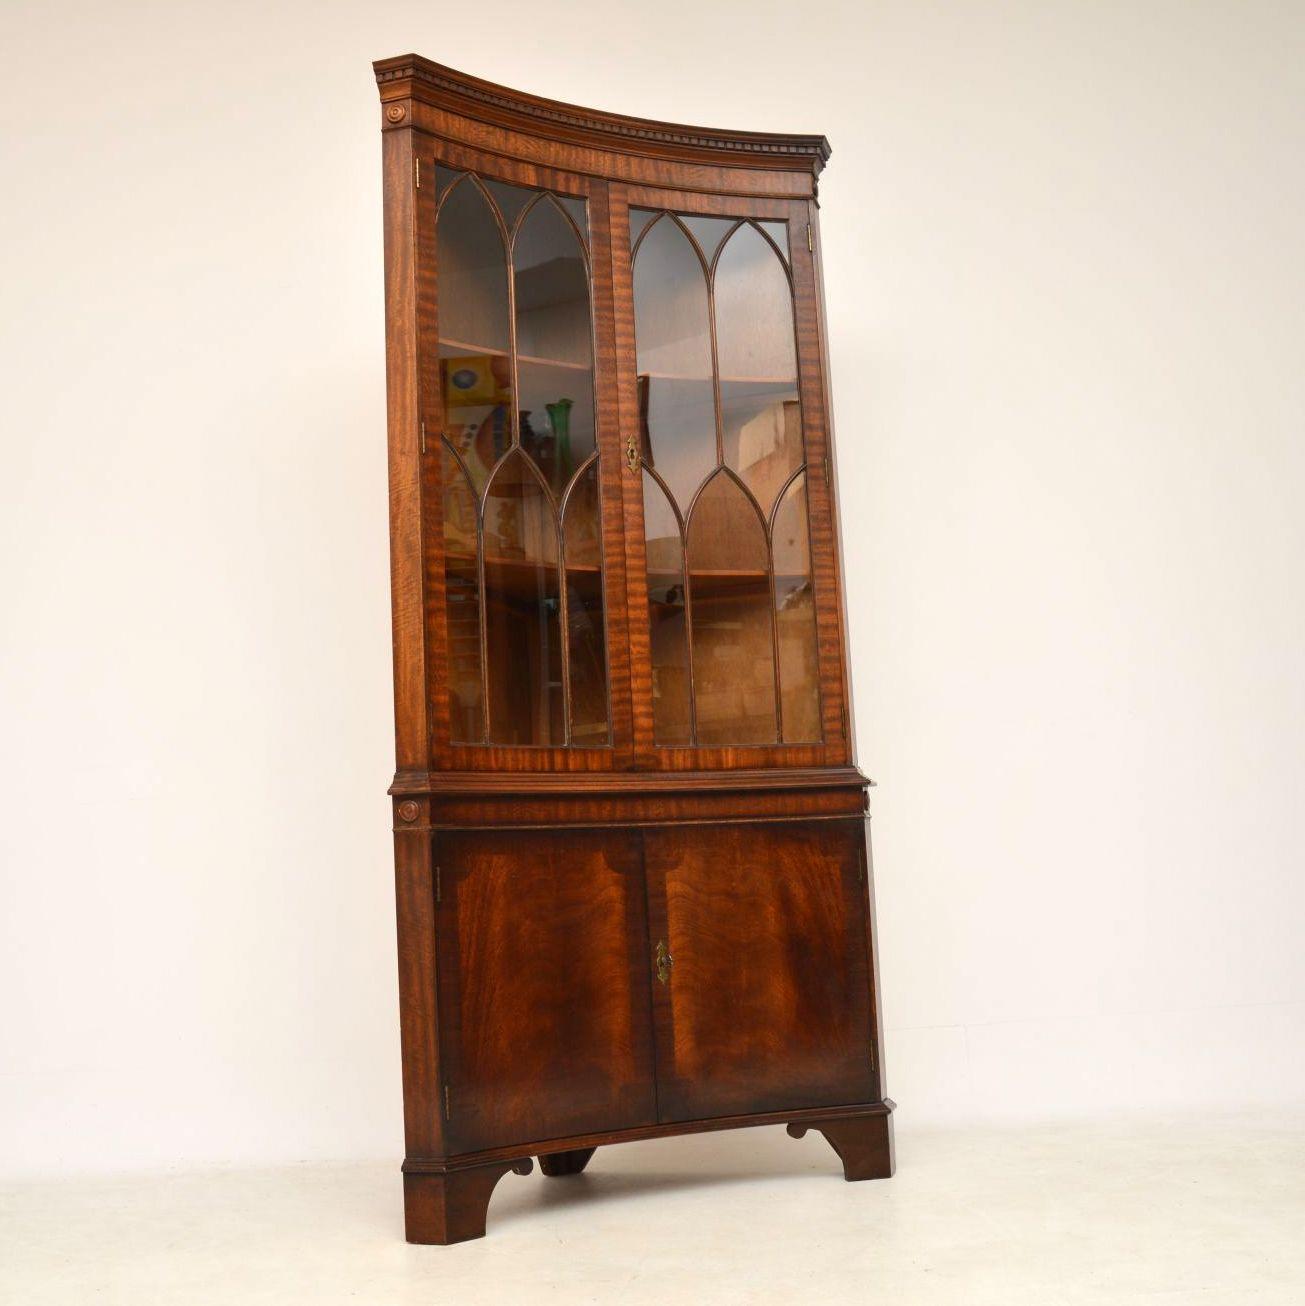 This antique mahogany corner cabinet is really good quality and has some lovely features. It has a concave shaped front, with two doors above and below. There’s a dental molding below the cornice, the two doors are astral-glazed, the bottom doors